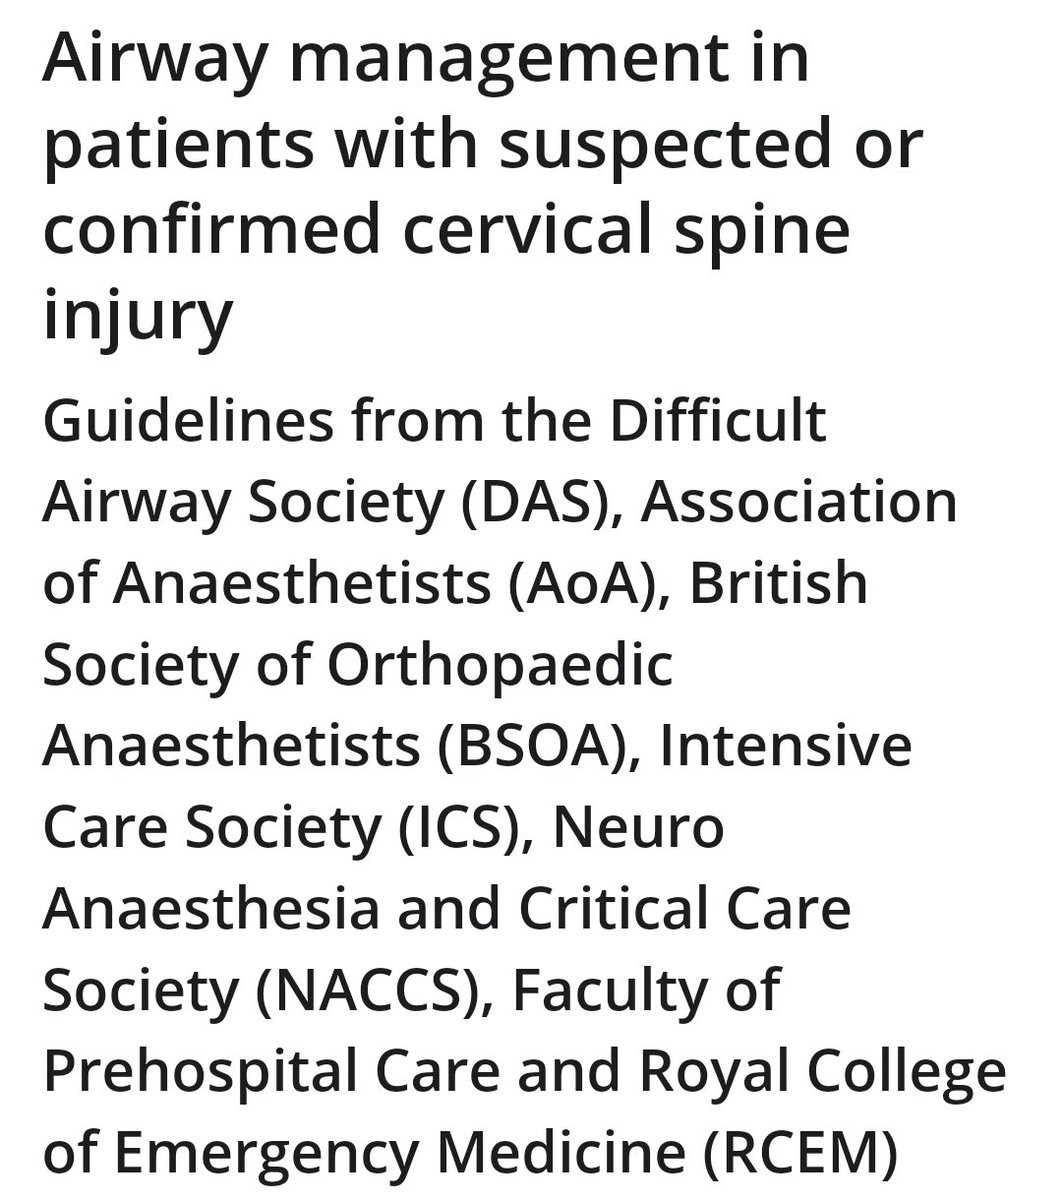 📣New guideline alert! Airway management in patients with suspected/confirmed cervical spine injury Joint guideline from @dasairway @Assoc_Anaes @Bsoa_org_uk @ICS_updates @naccsuk @FPHCEd and @RCEMLearning …-publications.onlinelibrary.wiley.com/doi/10.1111/an… Open access!